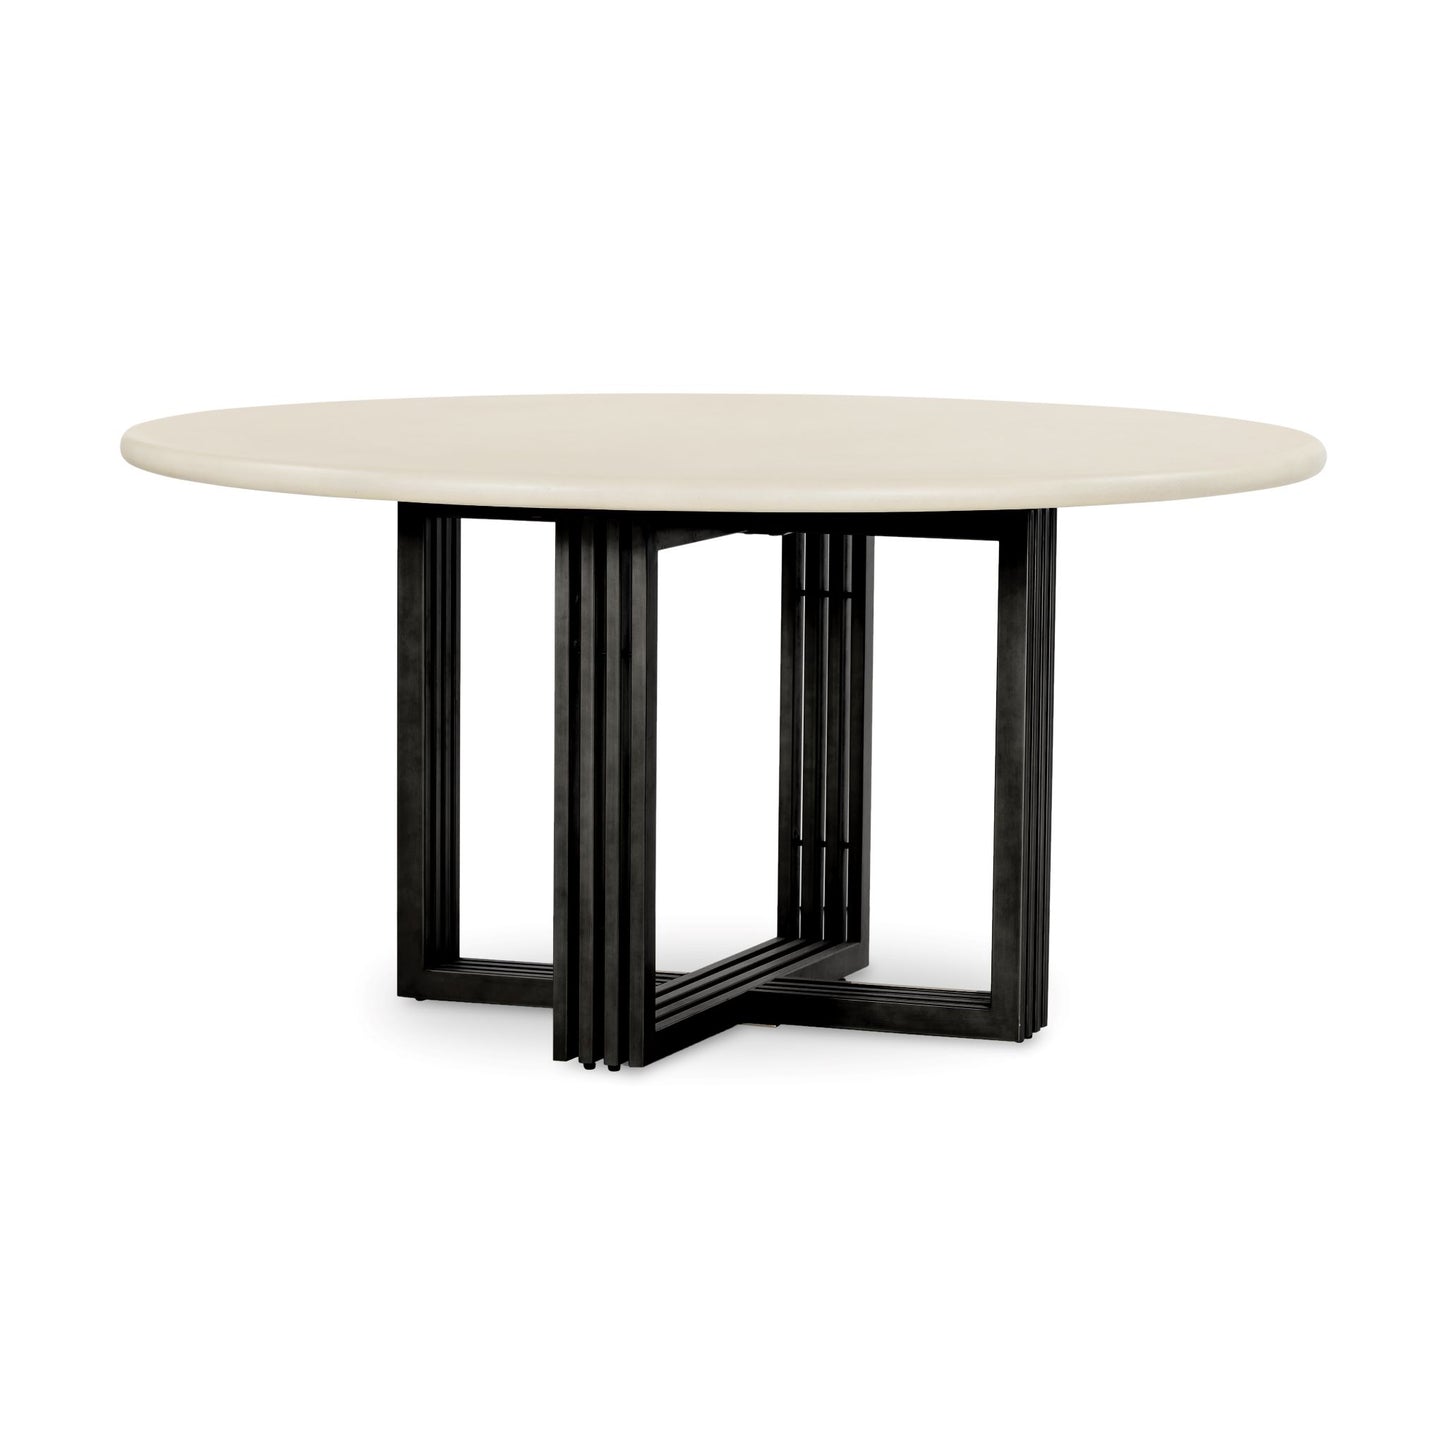 Load image into Gallery viewer, Mia Round Dining Table Antique Black MetalDining Table Four Hands  Antique Black Metal   Four Hands, Mid Century Modern Furniture, Old Bones Furniture Company, Old Bones Co, Modern Mid Century, Designer Furniture, https://www.oldbonesco.com/
